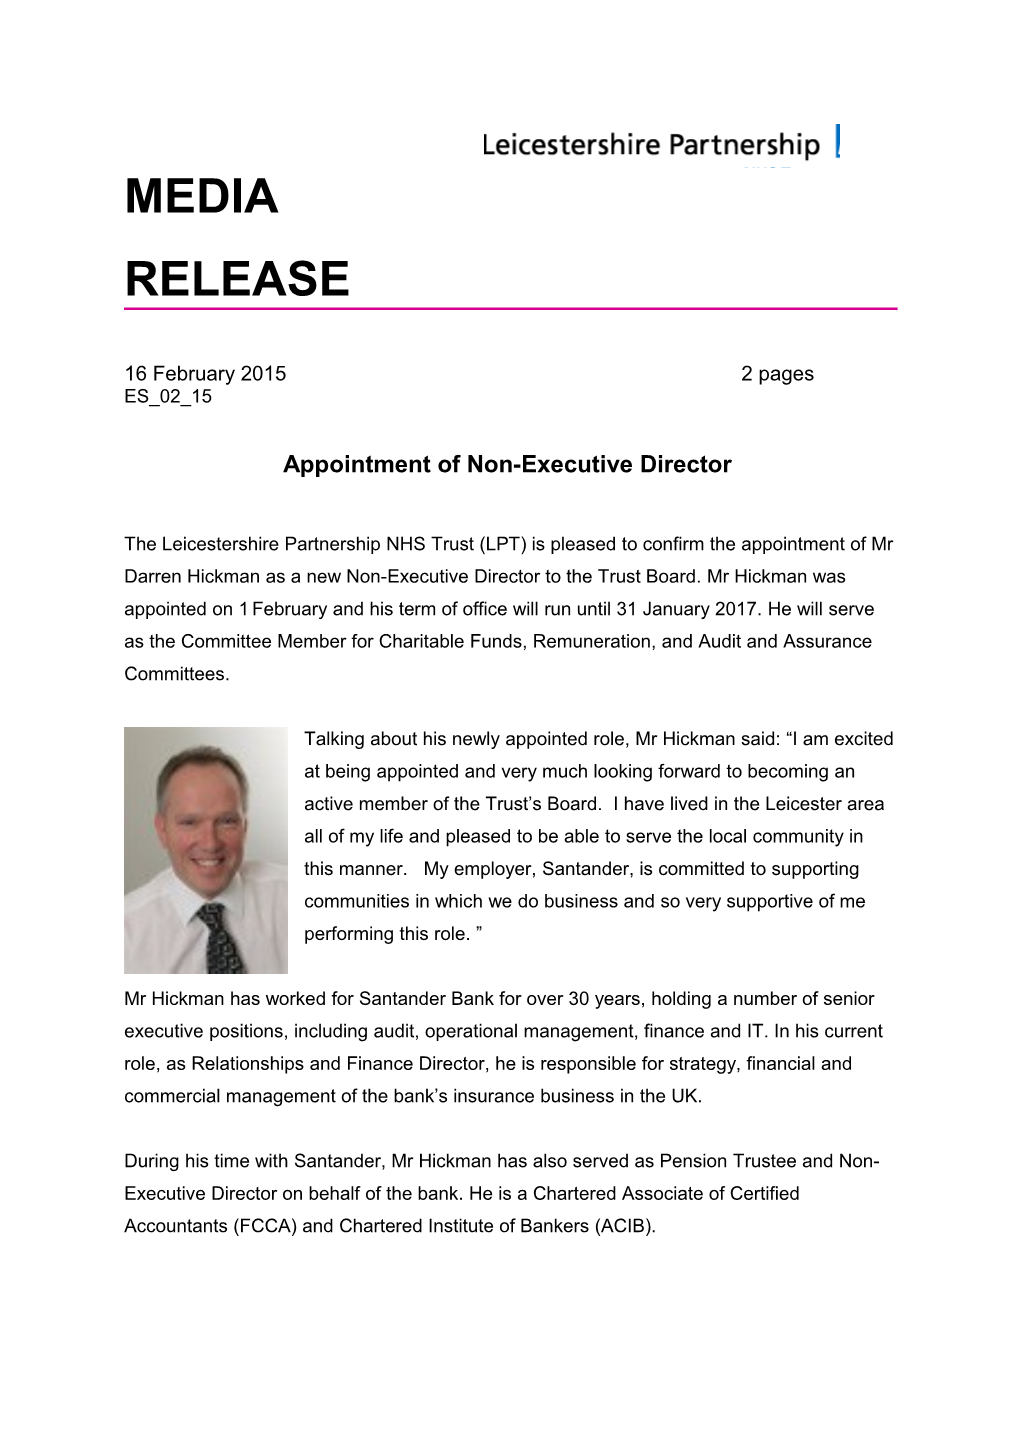 Appointment of Non-Executive Director